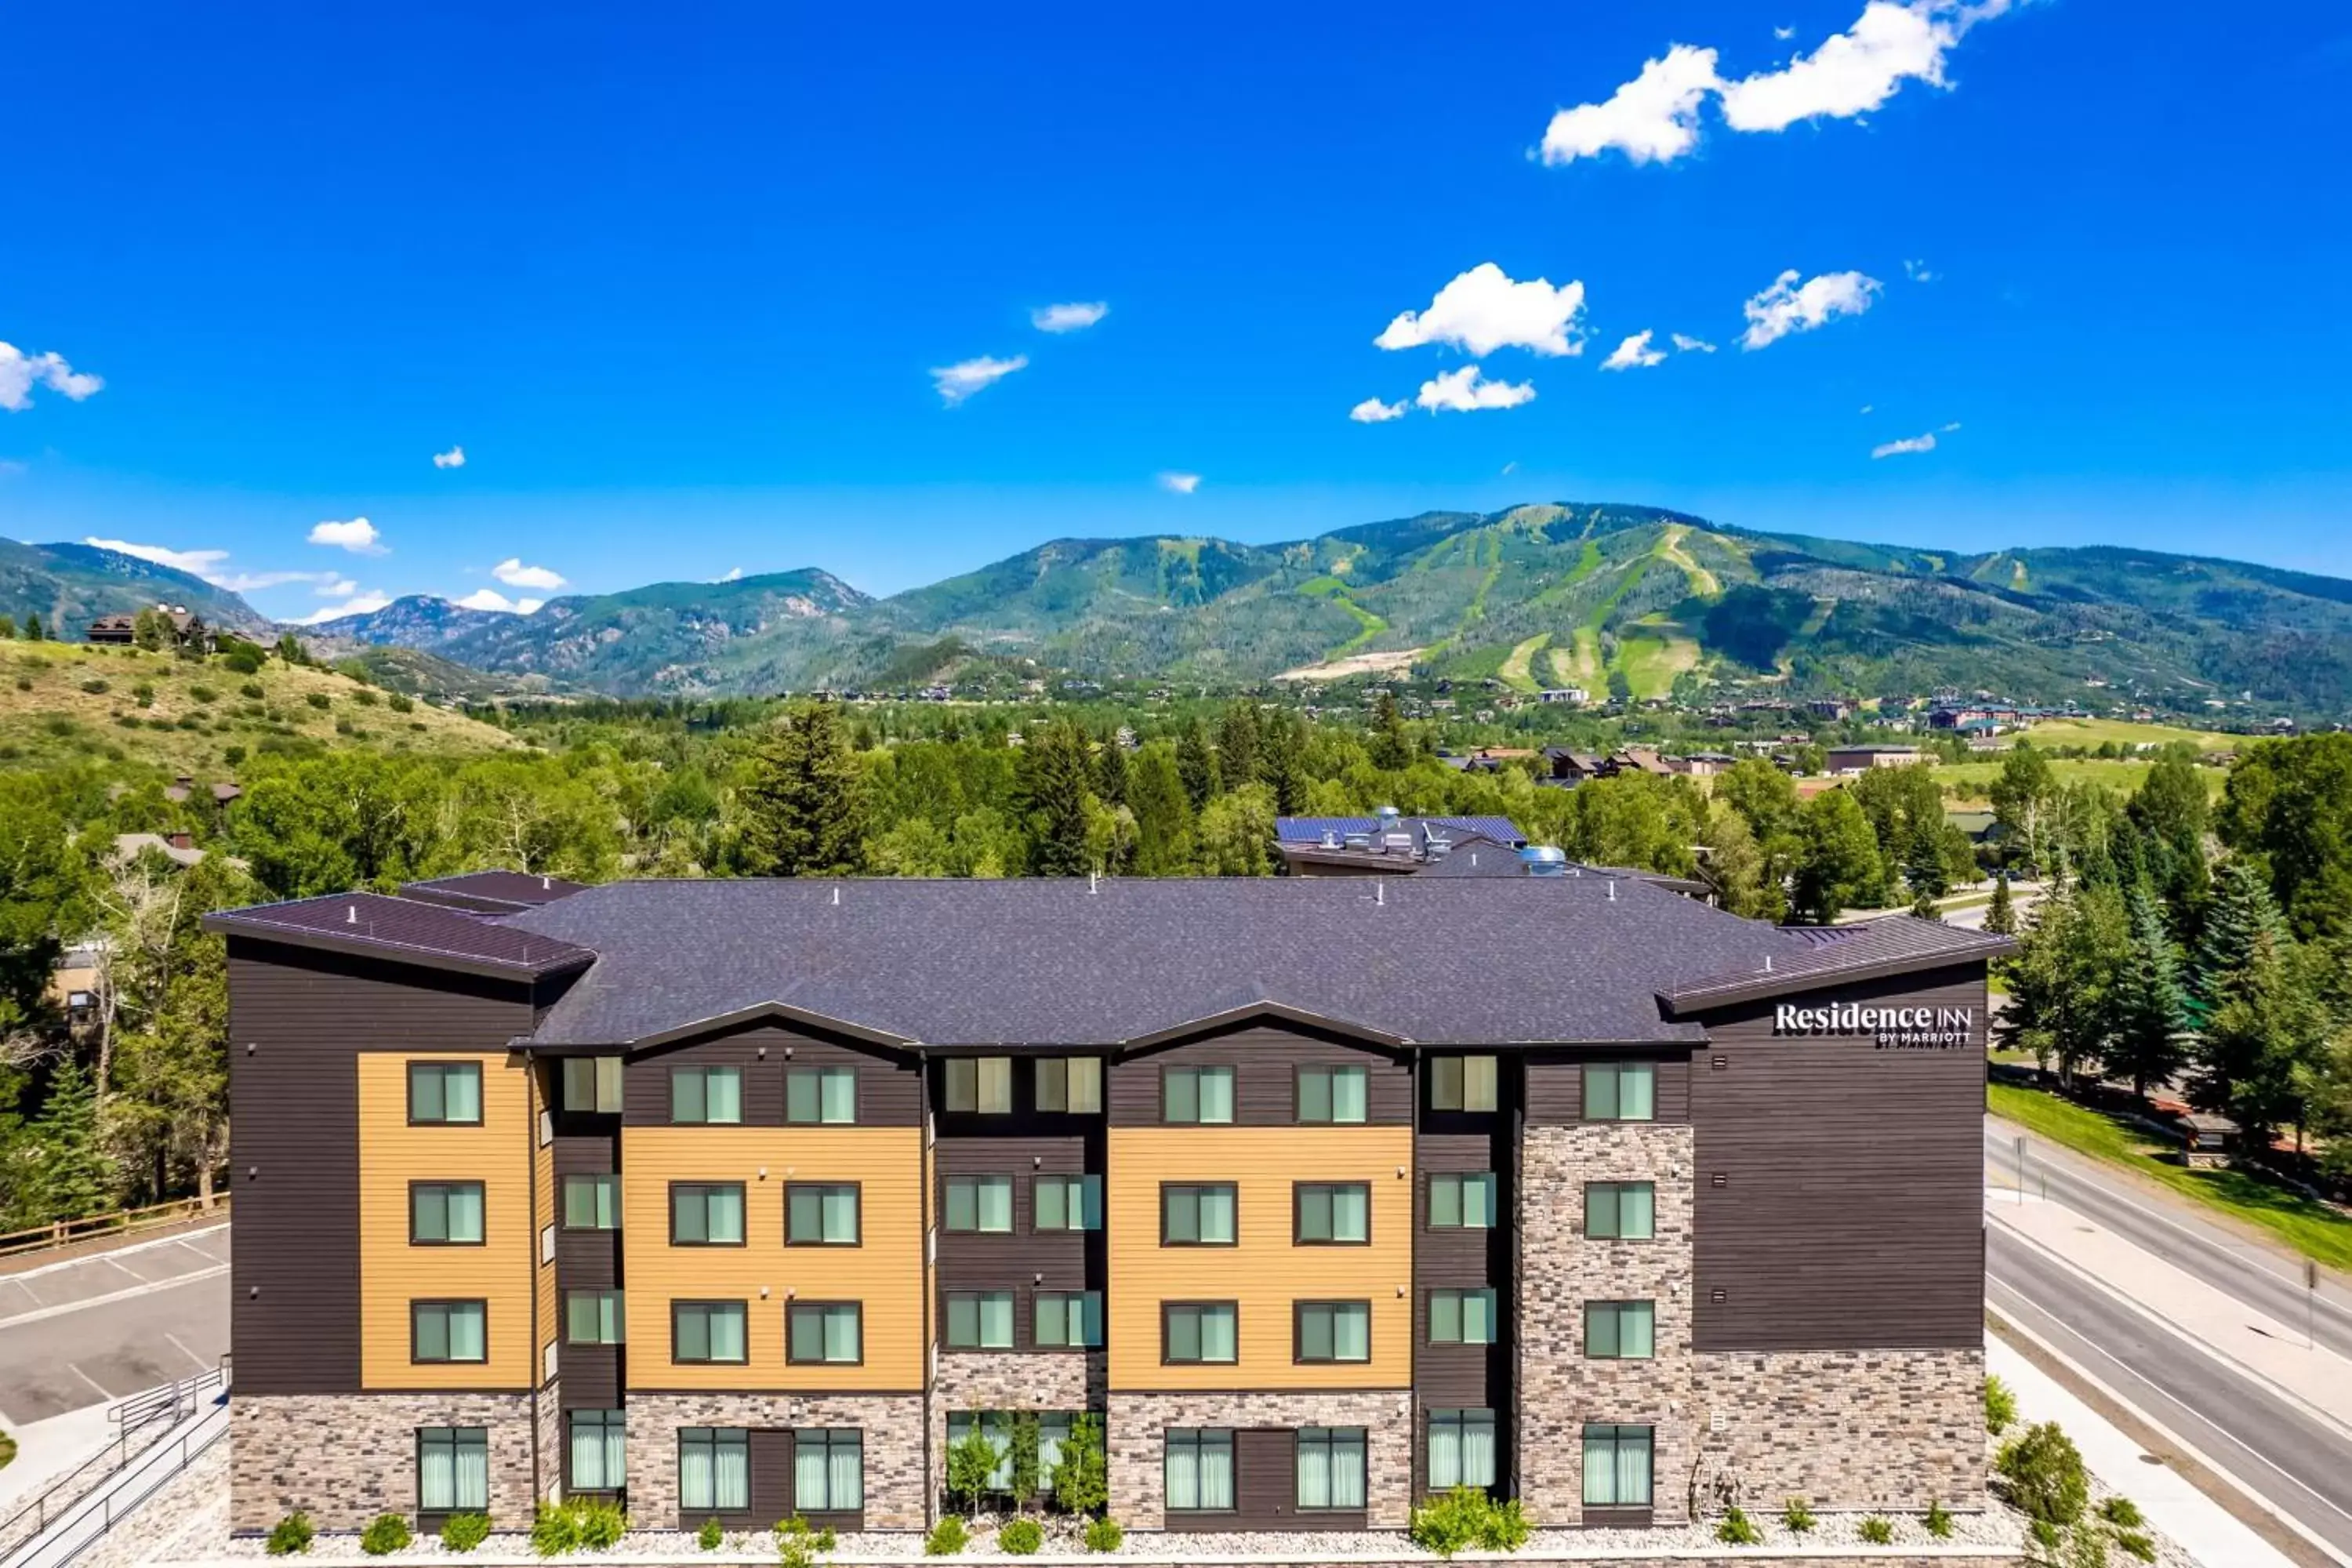 Property building, Mountain View in Residence Inn by Marriott Steamboat Springs